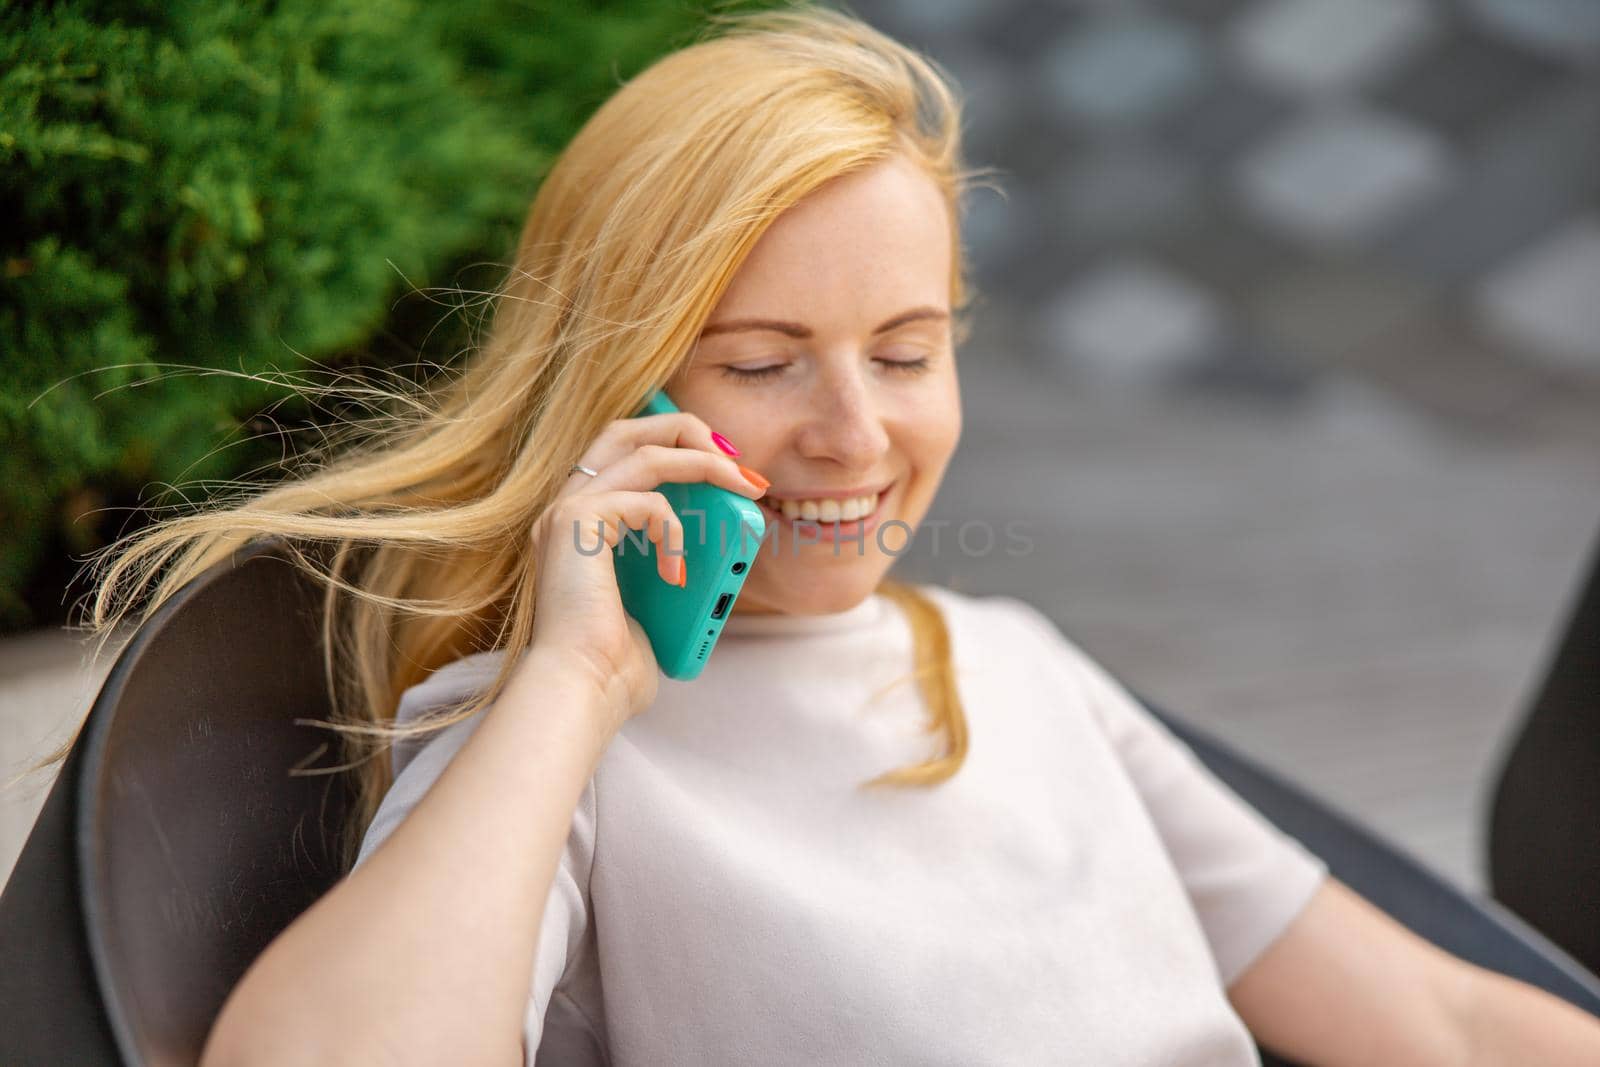 Young blond woman sittings outdoors in the city and making a call with her smartphone. Girl talking with friends with mobile phone. Leisure activity, communication. Conversation. Mobile technology